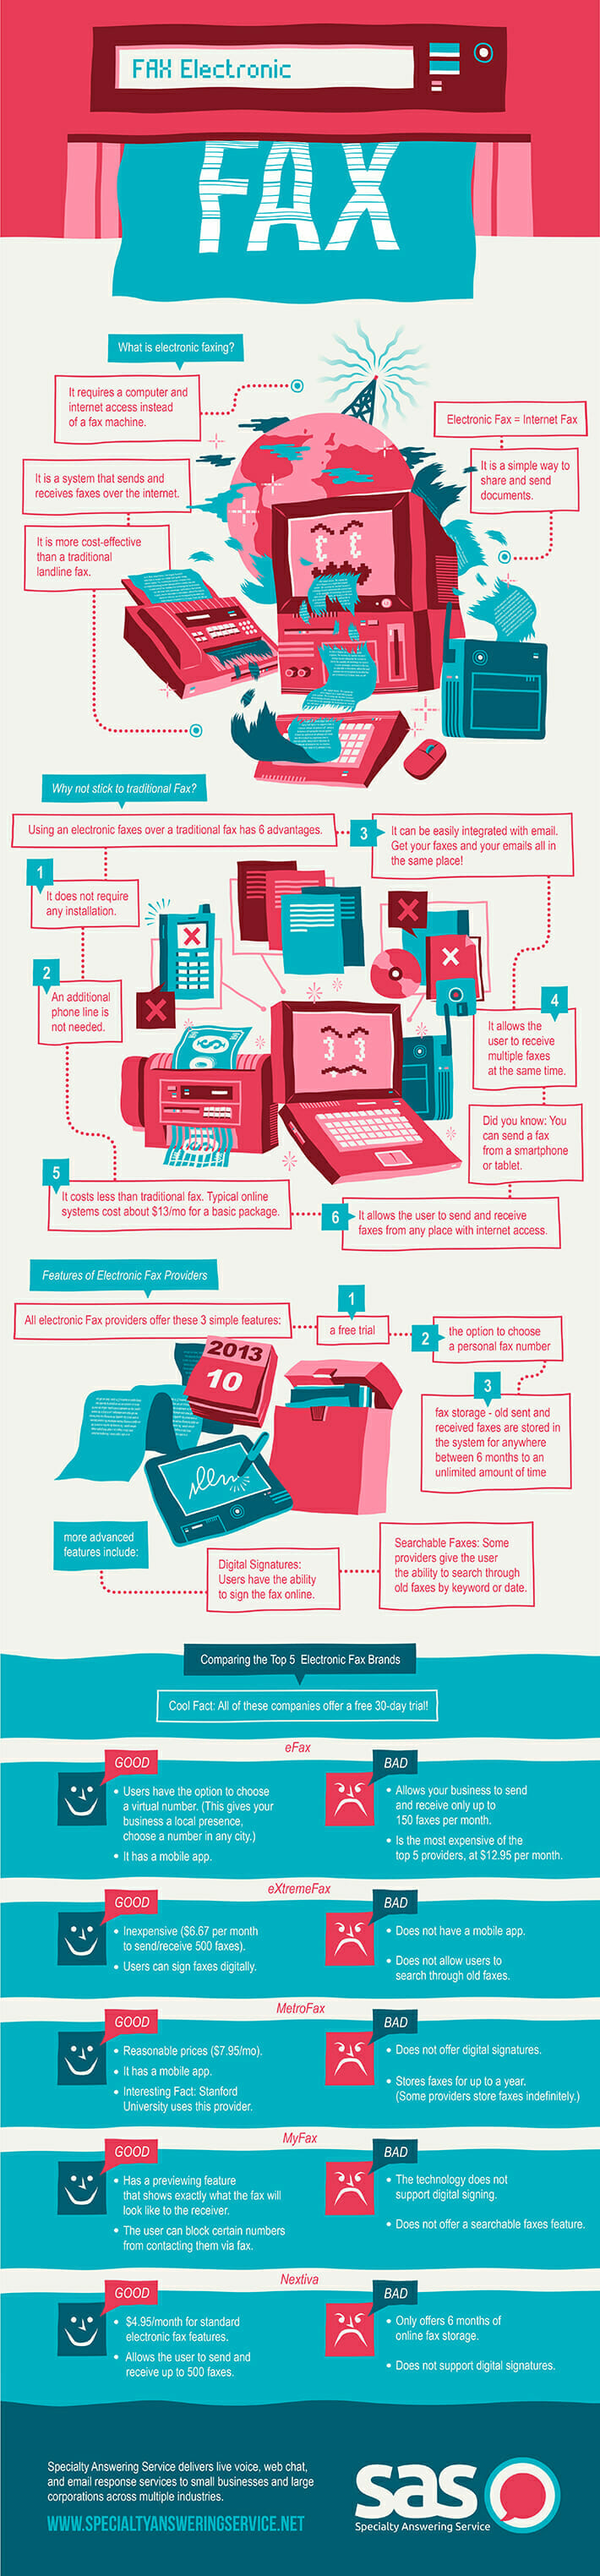 Infographic comparing electronic fax services